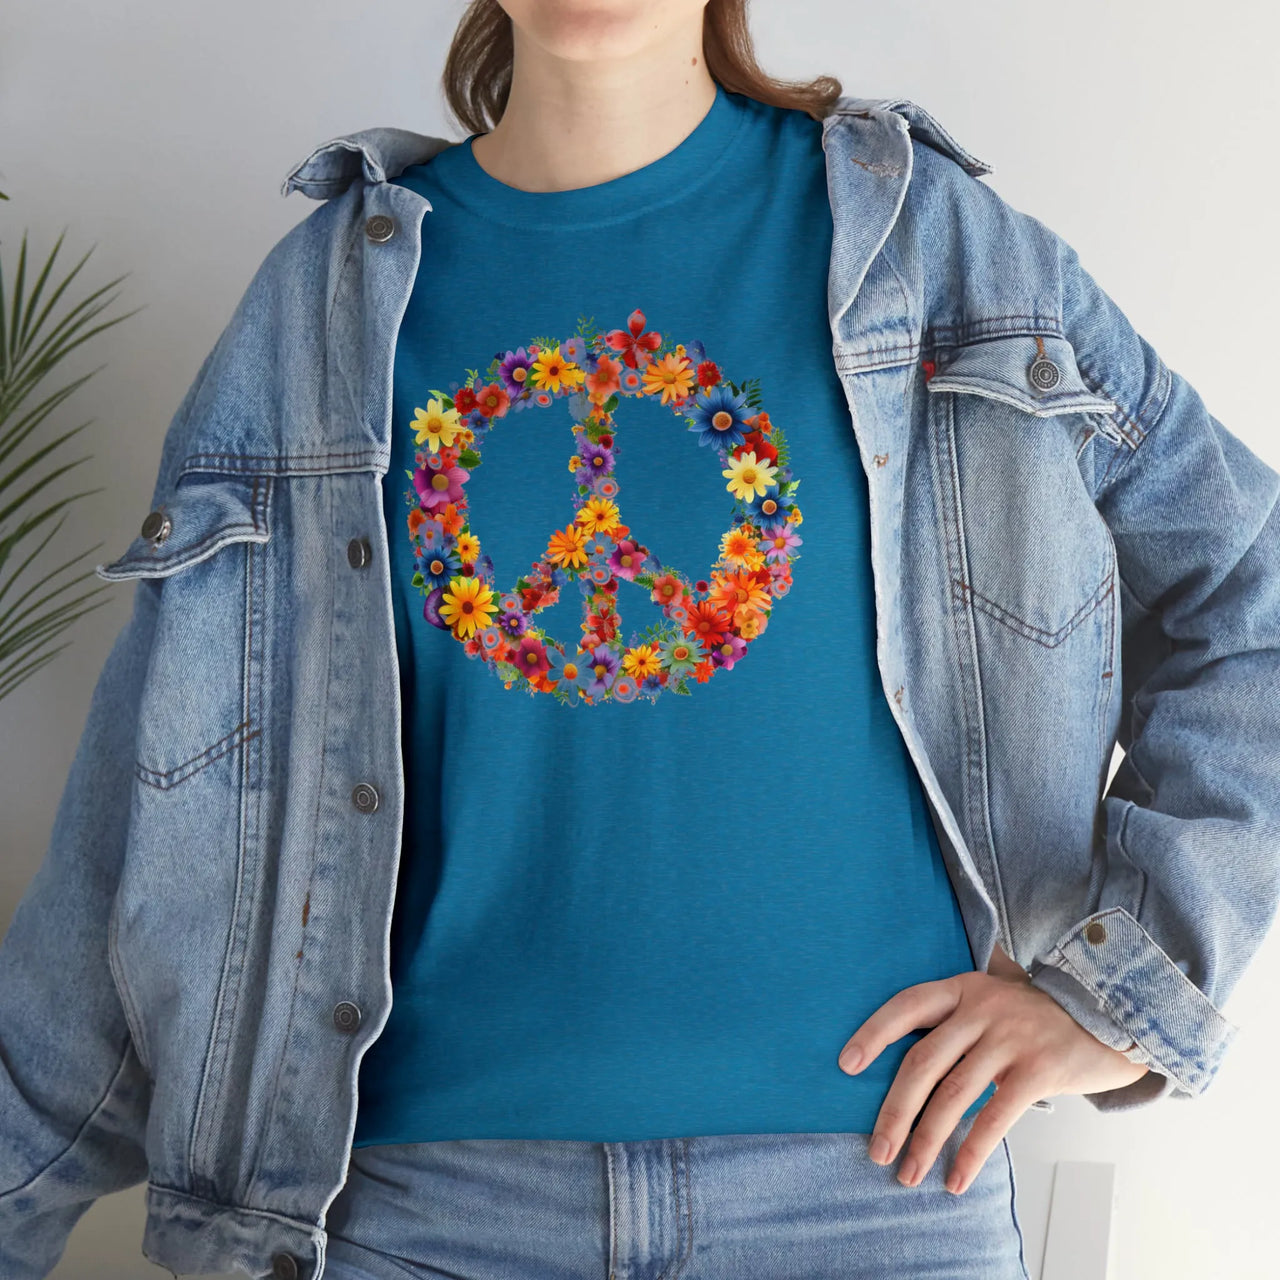 Flower Power Peace Sign Heavy Cotton Tee - Retro 70s Inspired T-Shirt